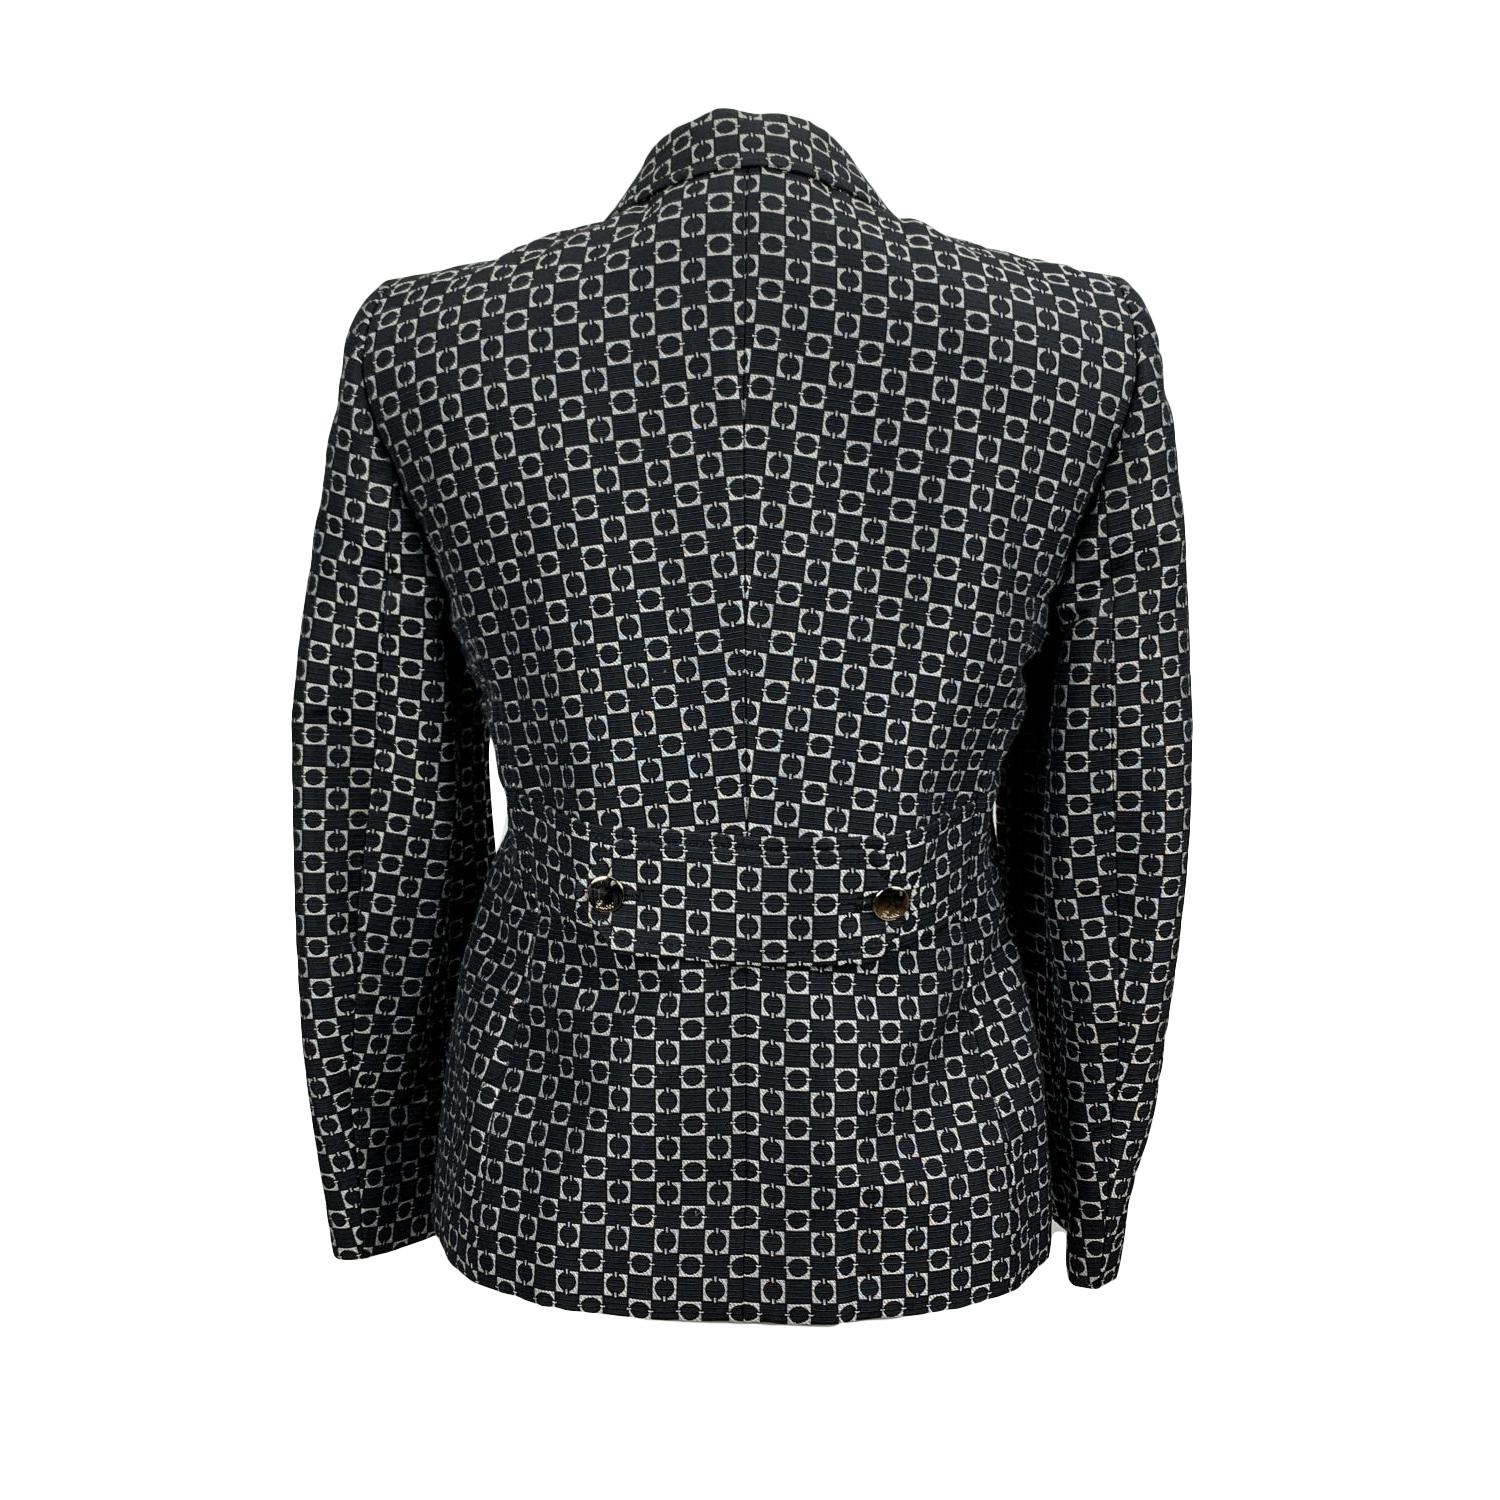 Gucci black and white patterned blazer jacket. Contrast geometric pattern. Composition: 80% Cotton, 20% Silk. Black silky lining. Half-belt on the back. Frony button closure. Designer's buttons. Asymmetric front flap pockets. Size: 40 IT (The size